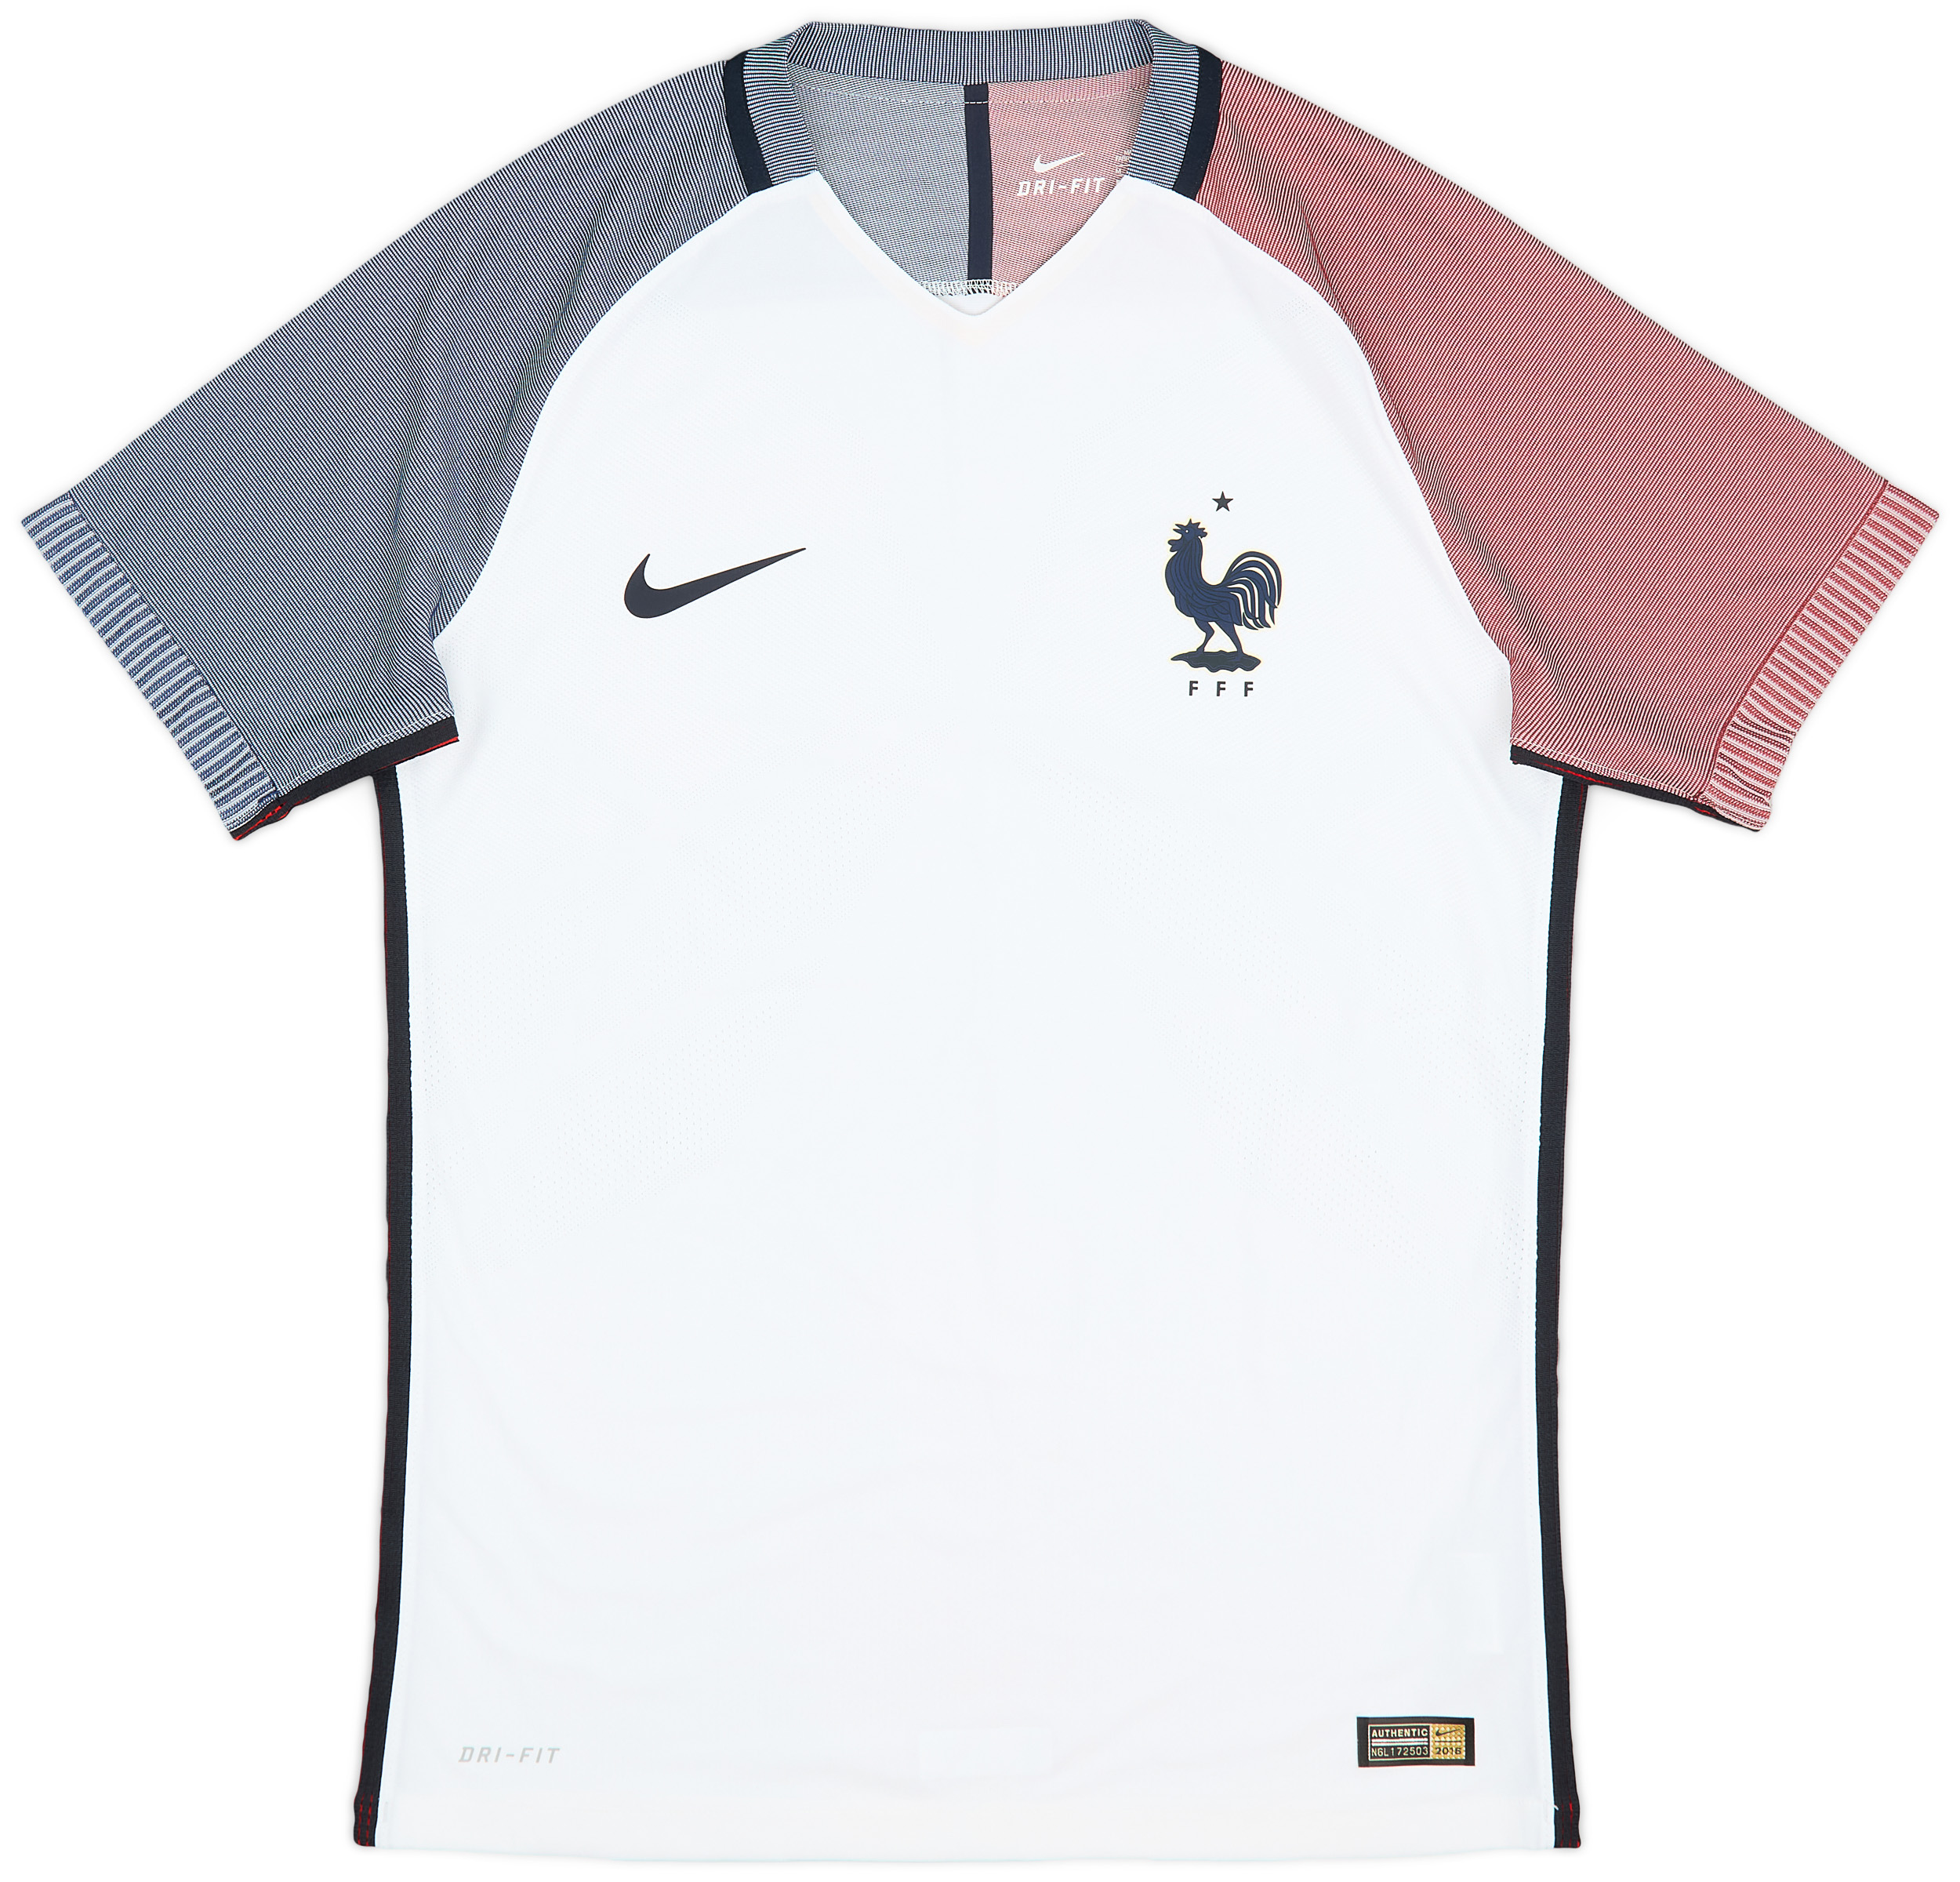 2016-17 France Authentic Away Shirt - 9/10 - ()